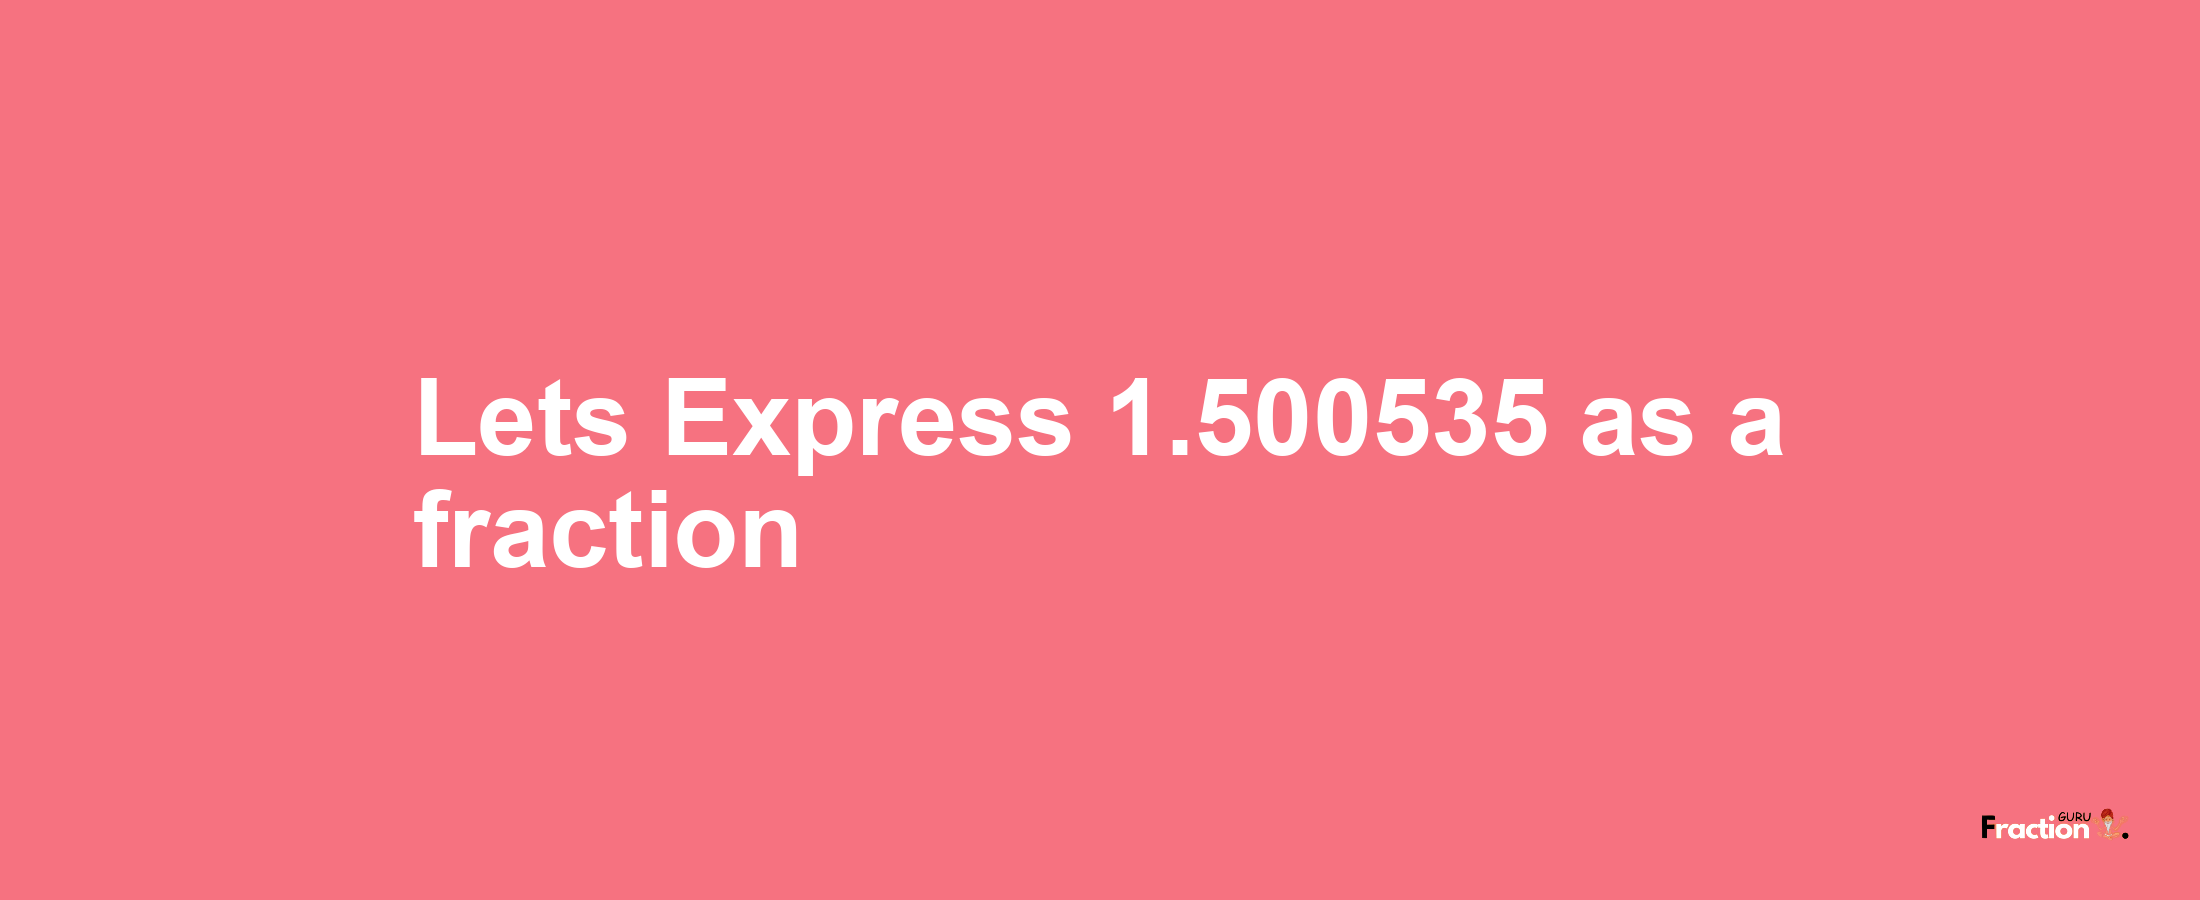 Lets Express 1.500535 as afraction